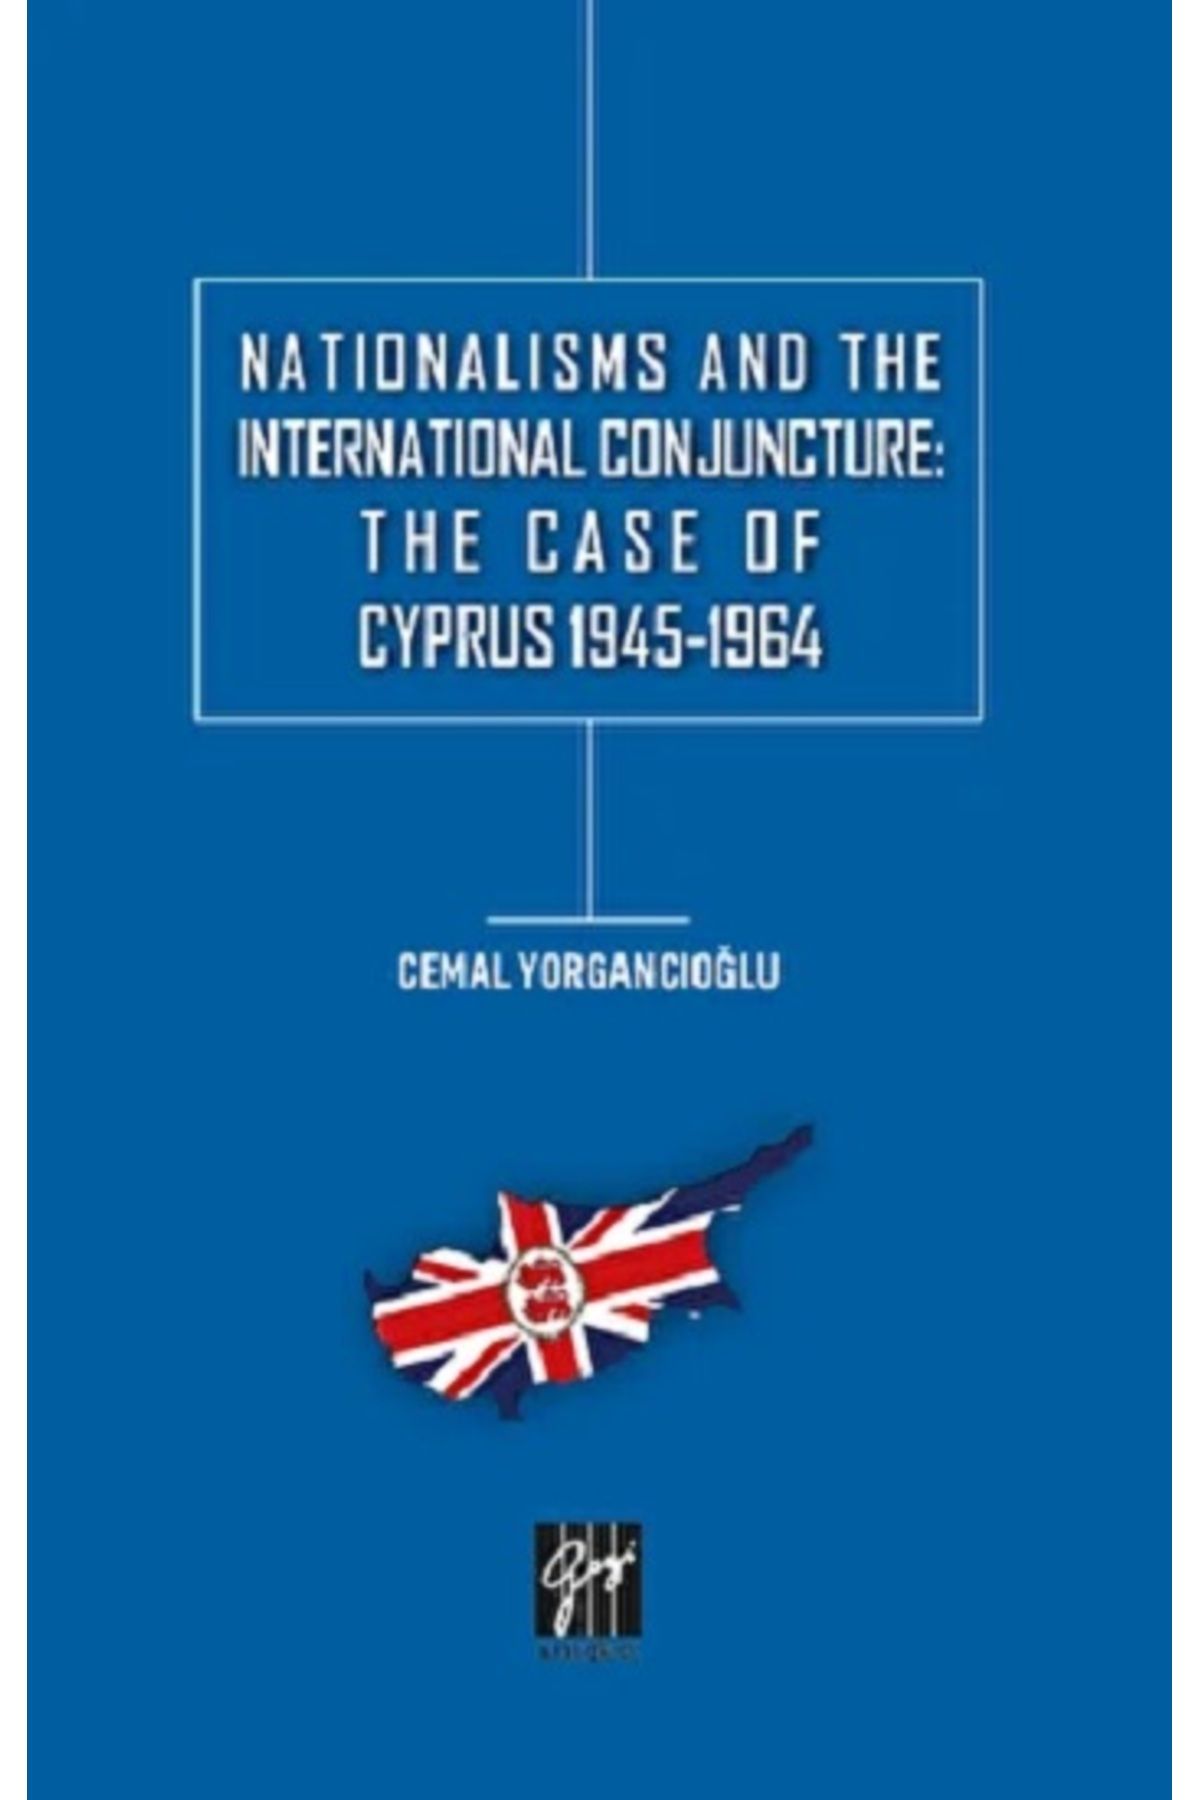 Gazi Kitabevi Nationalisms And The International Conjuncture: The Case Of Cyprus 1945-1964